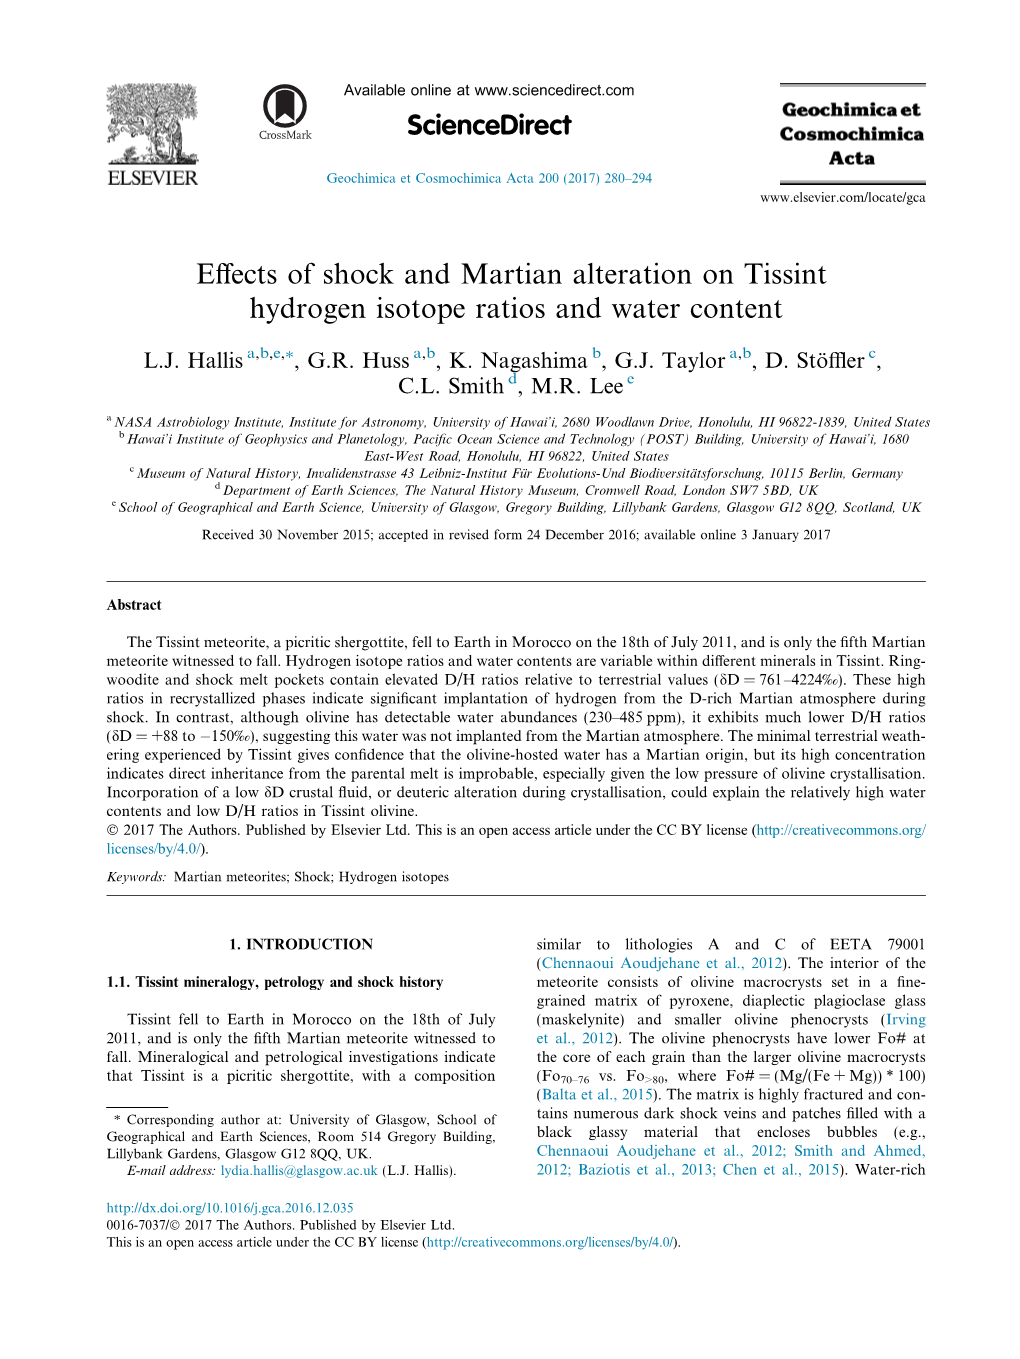 Effects of Shock and Martian Alteration on Tissint Hydrogen Isotope Ratios